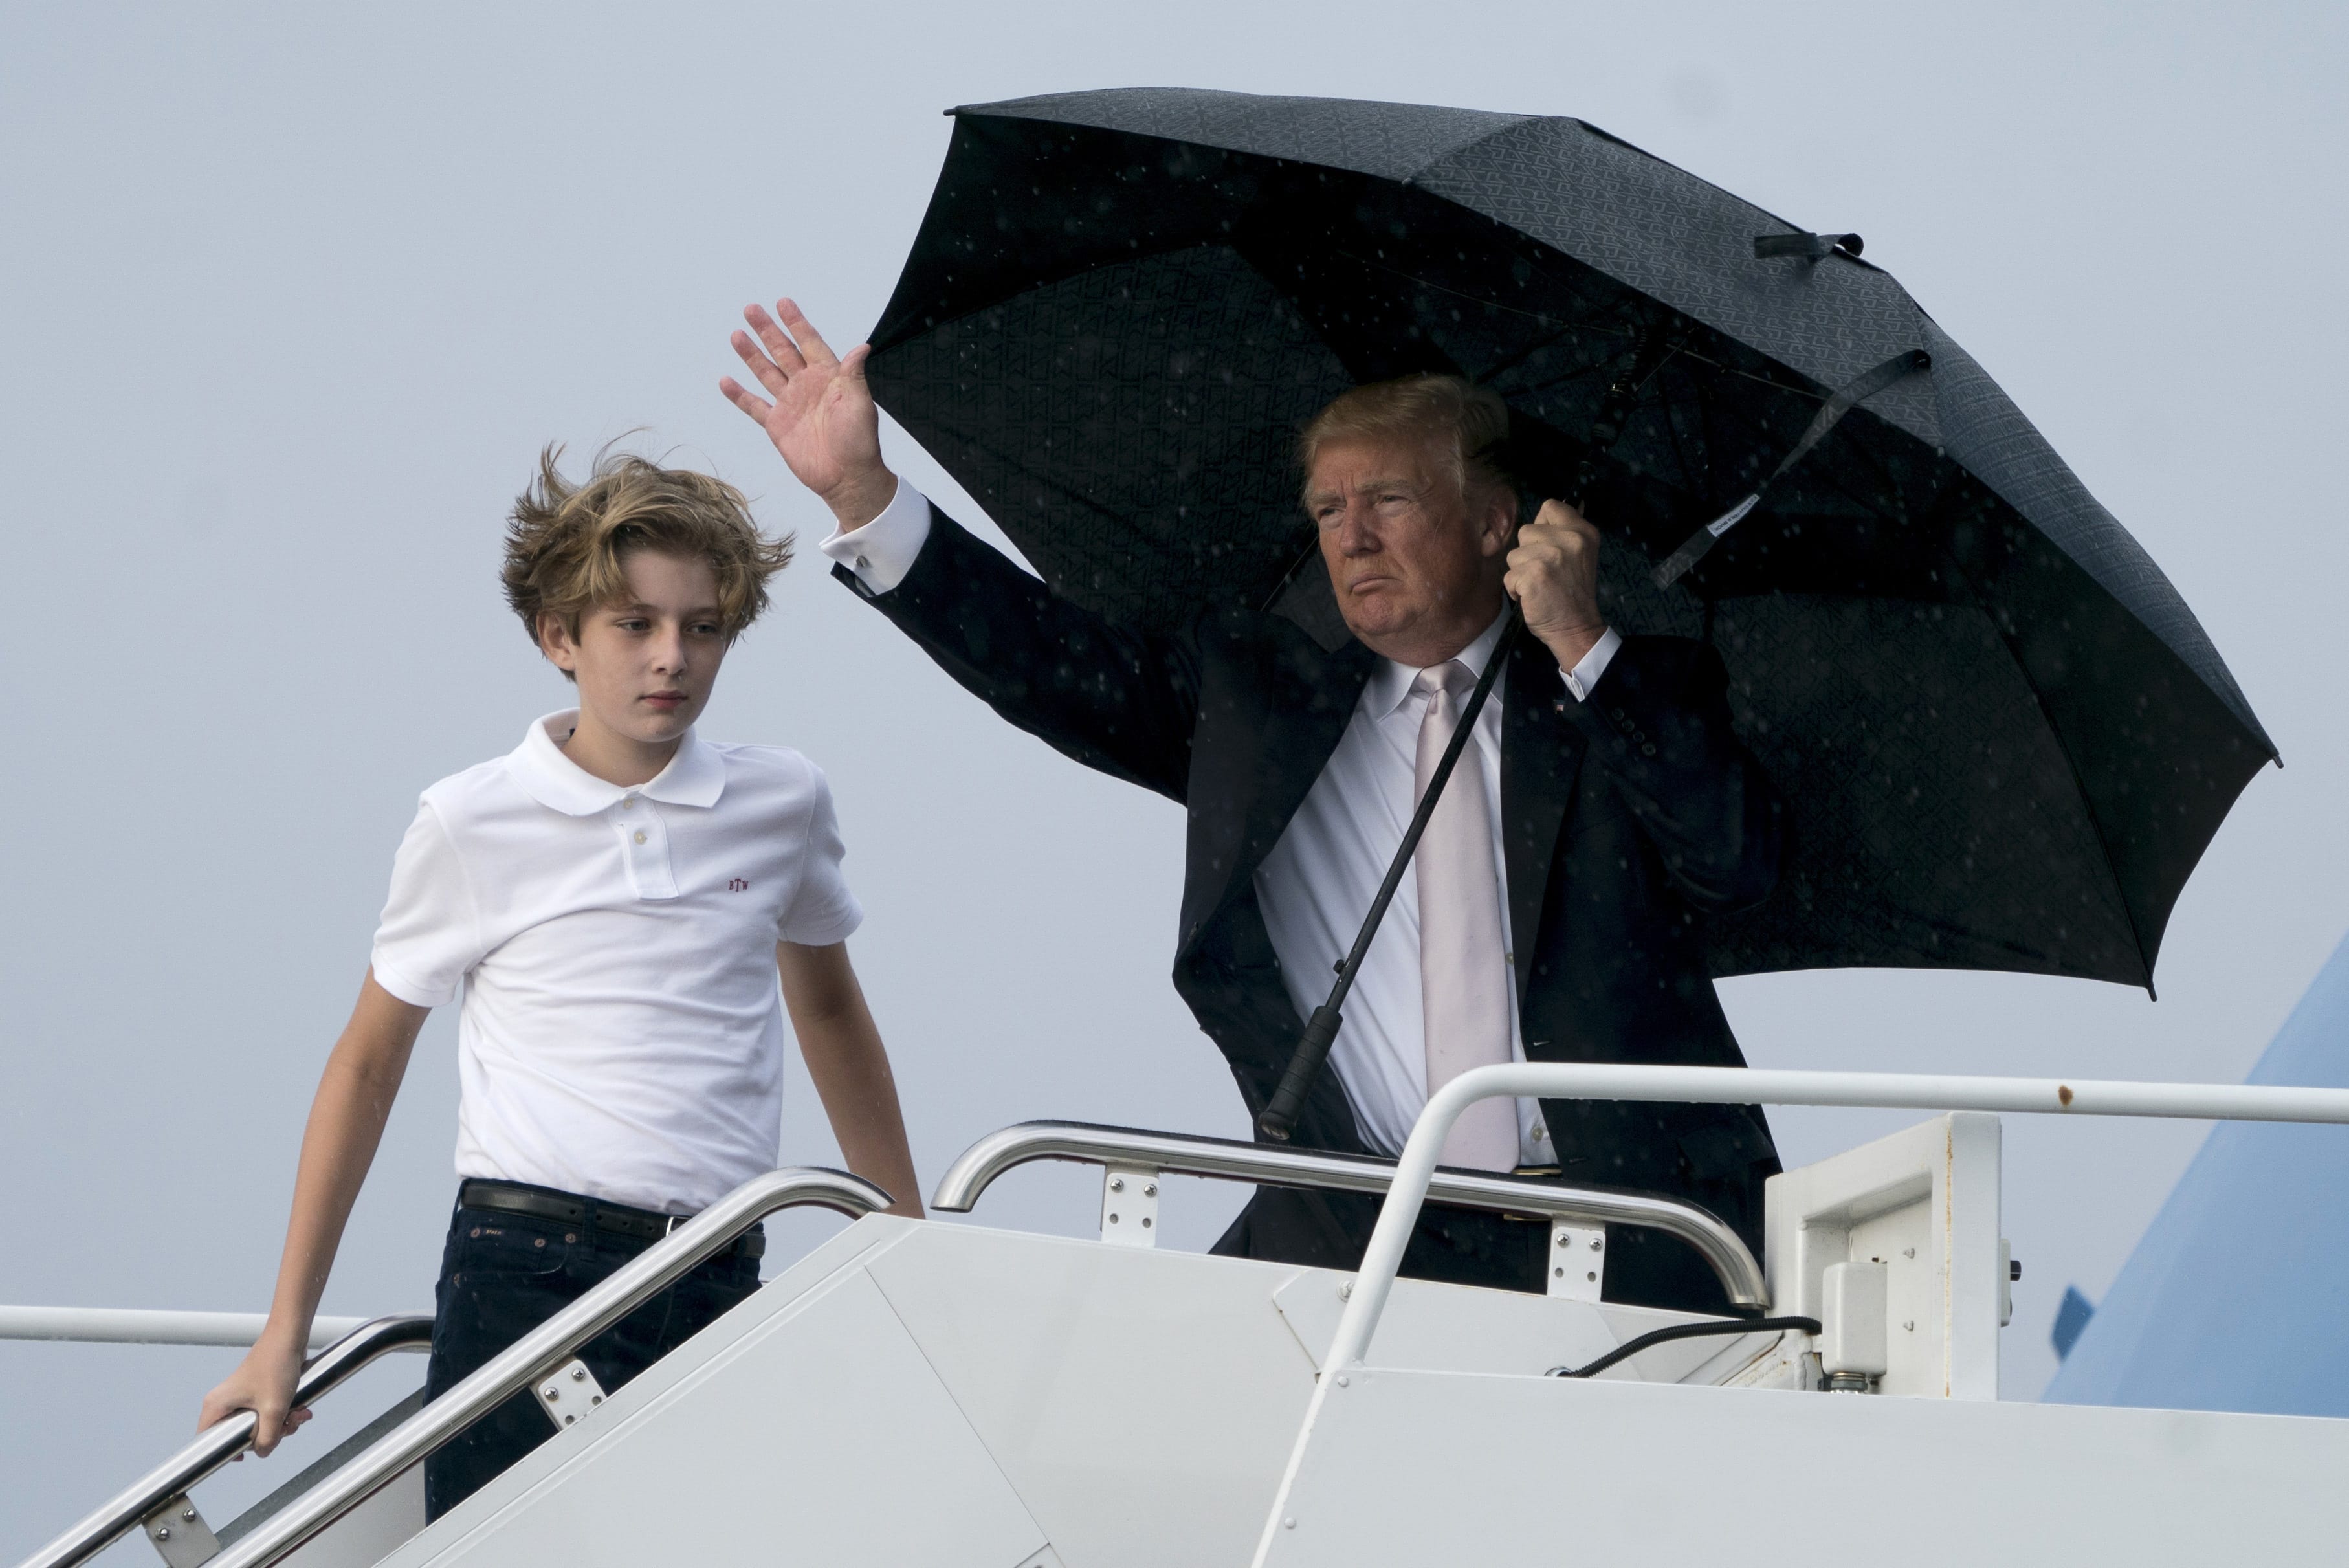 President Donald Trump and his son Barron board Air Force One at Palm Beach International Airport in West Palm Beach, Fla., Monday, Jan. 15, 2018, to travel to Washington. President Trump spent the holiday weekend at Mar-a-Lago, his club in Palm Beach, Fla.